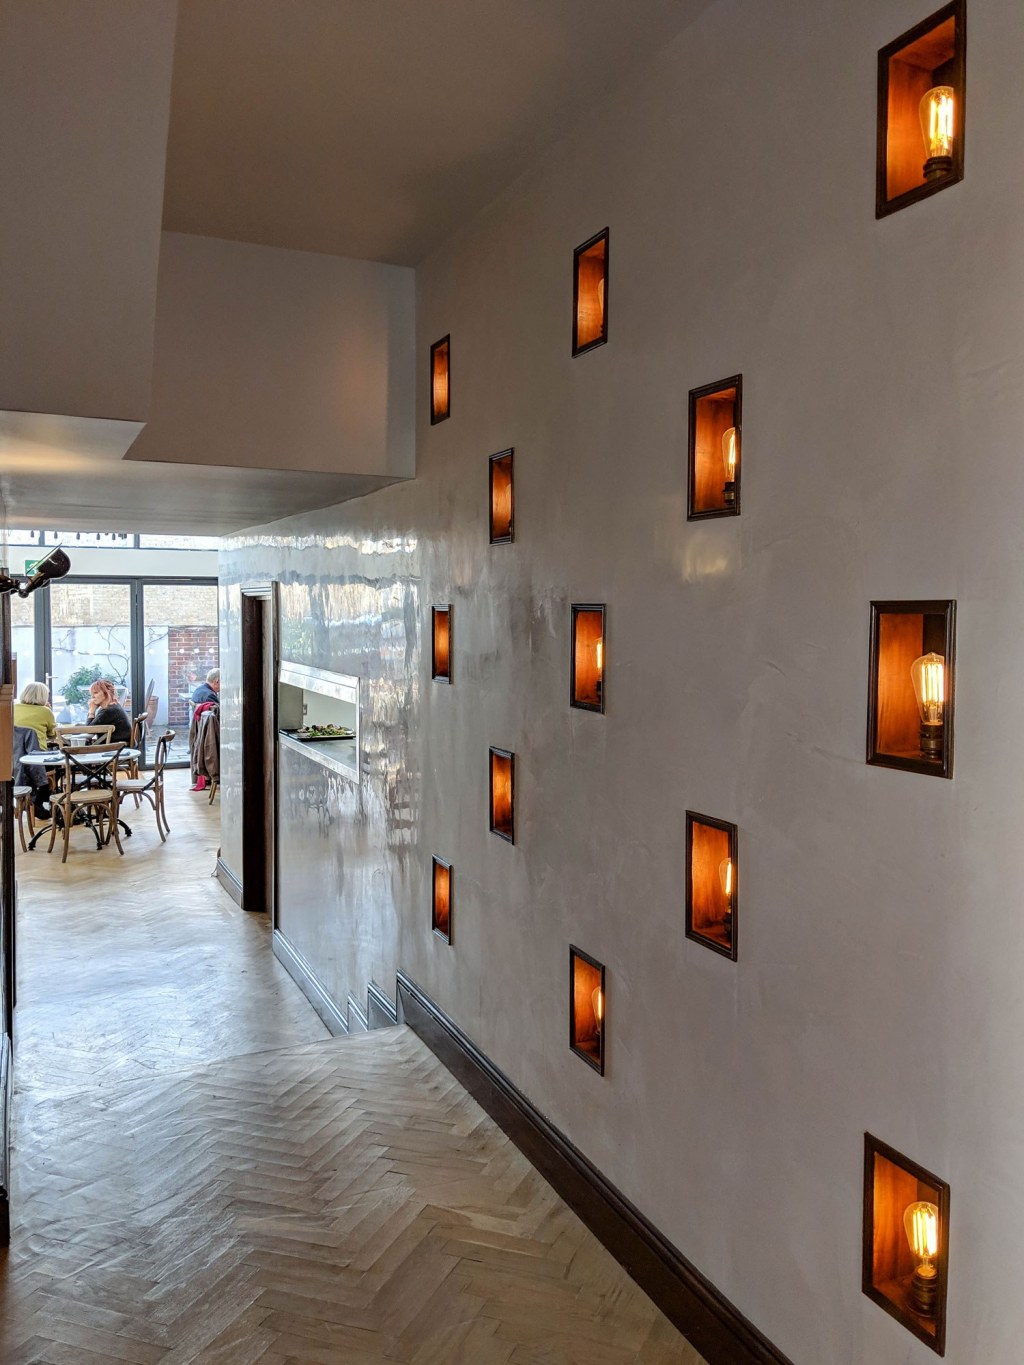 ThirtyEight, Summertown Oxford / Corridor between bar and restaurant showing wall with recessed lighting